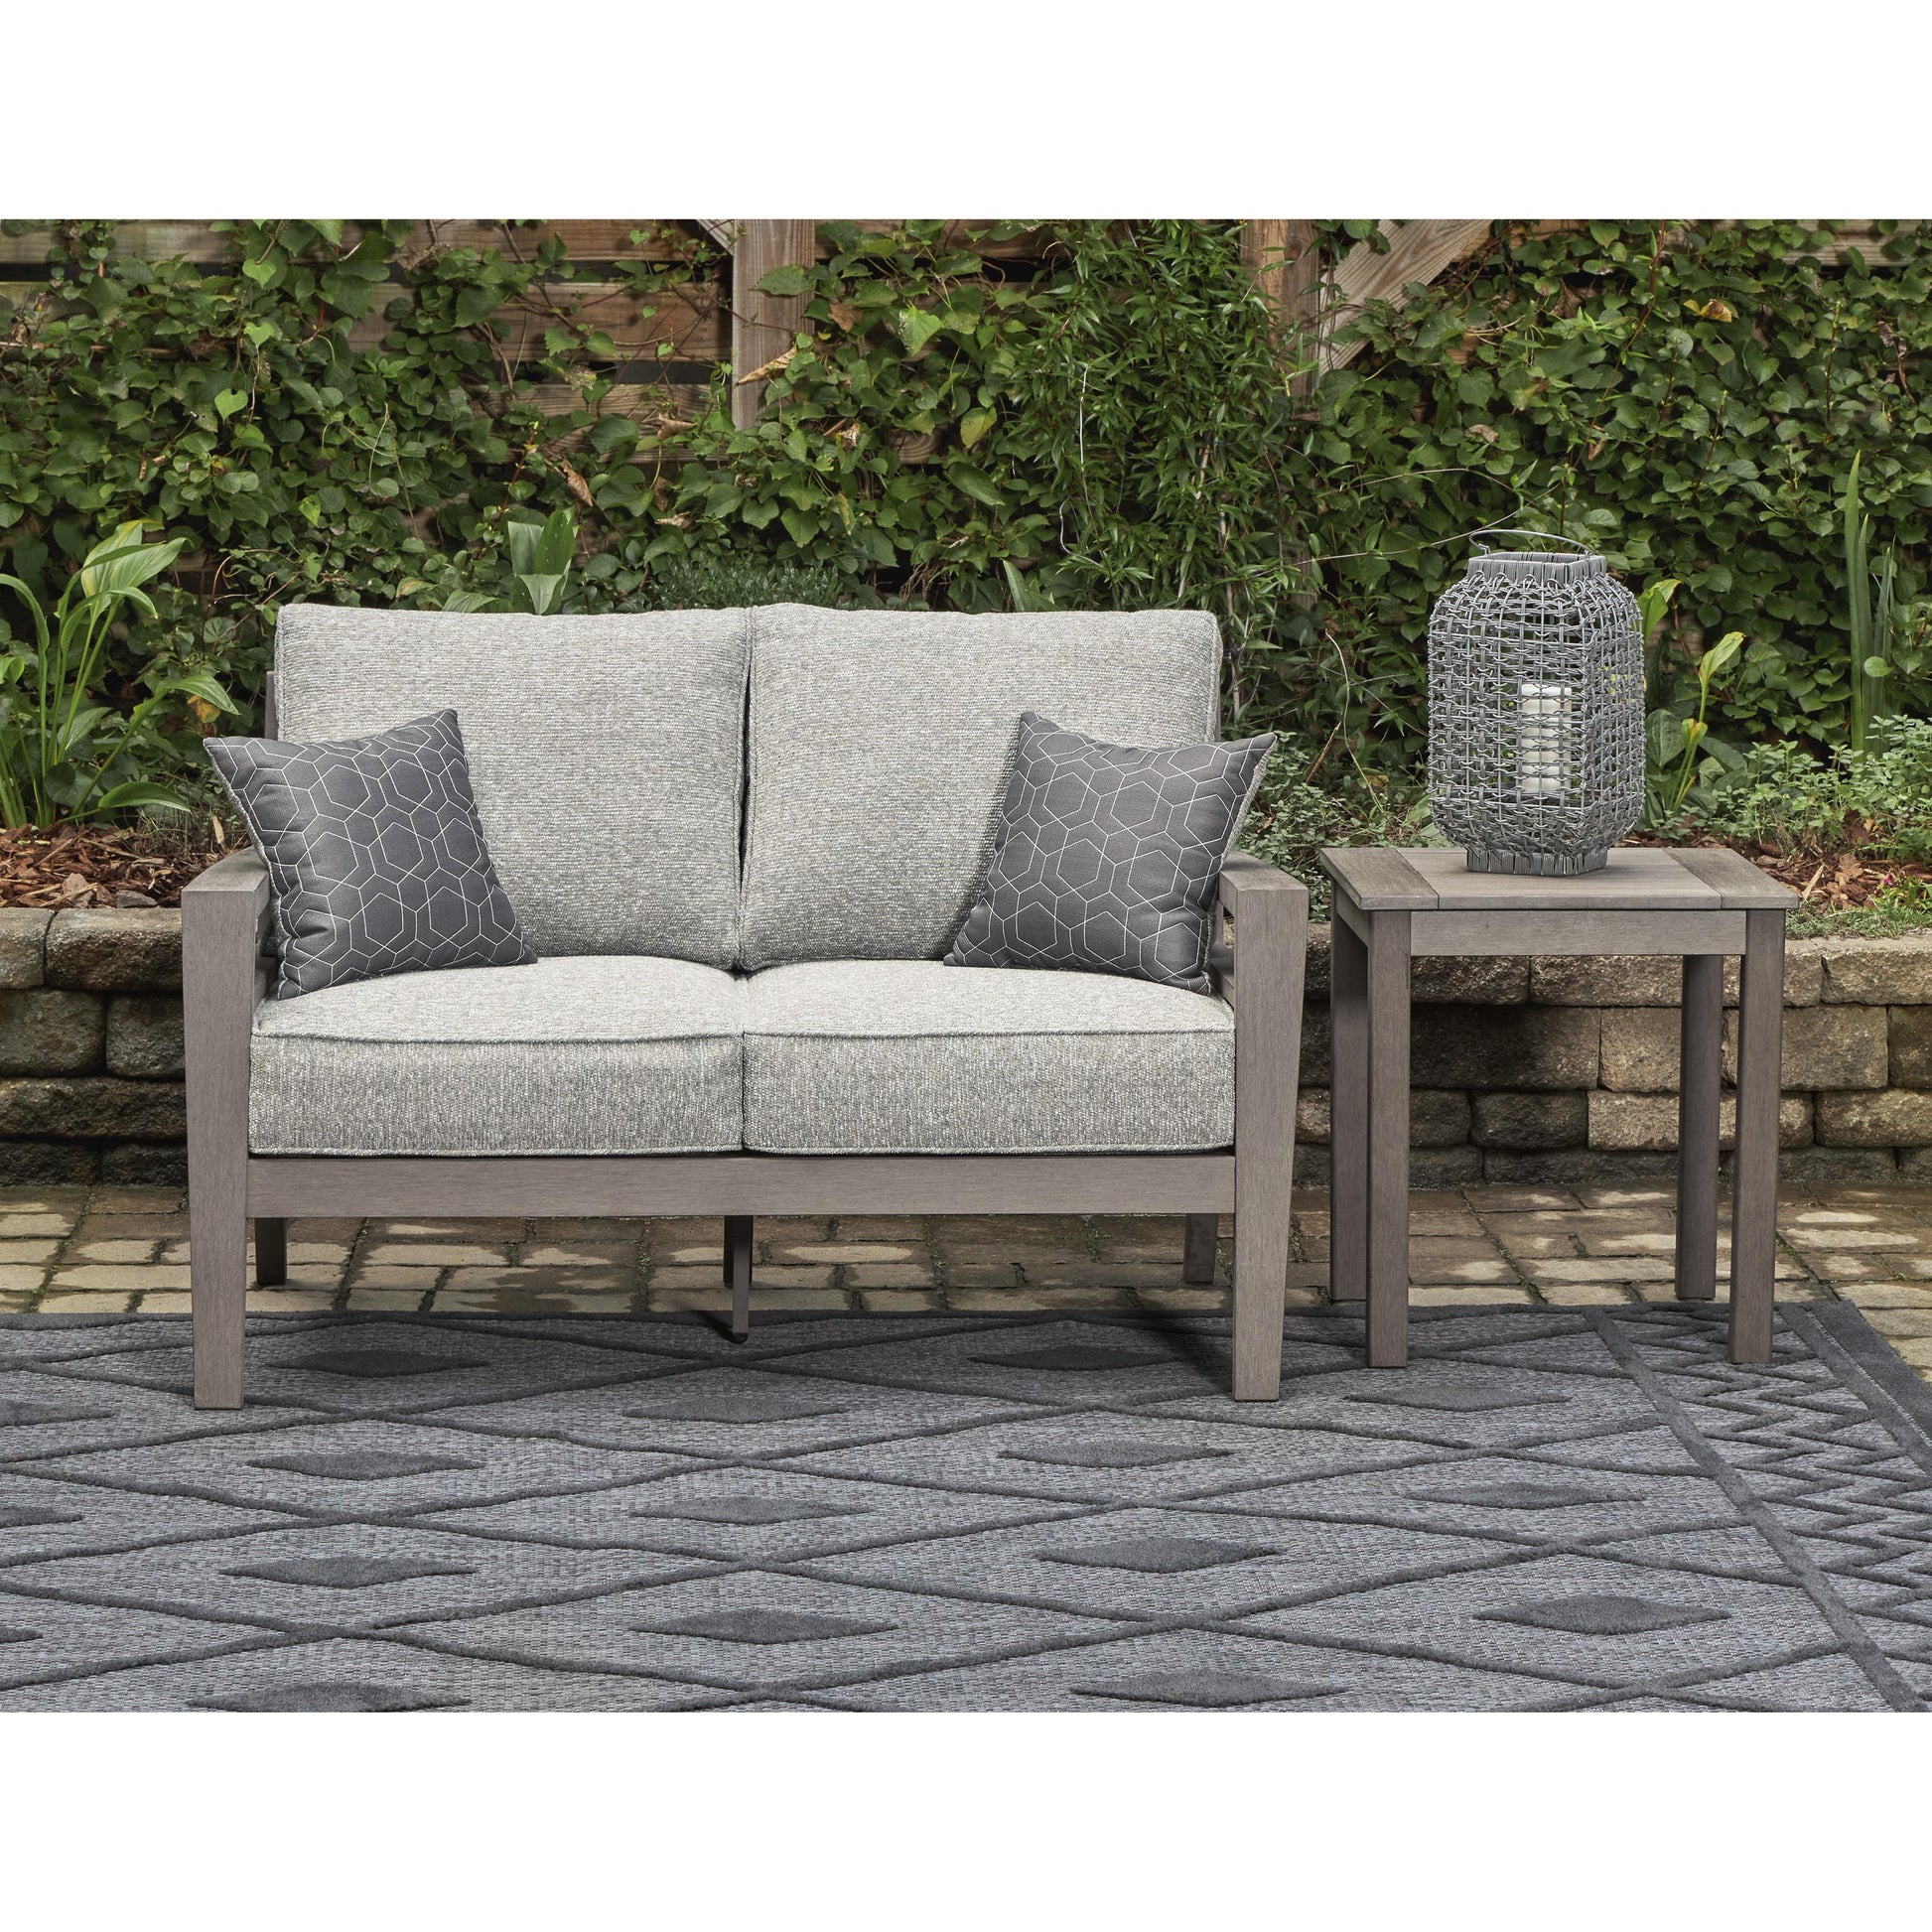 Signature Design by Ashley Outdoor Seating Loveseats P564-835 IMAGE 5